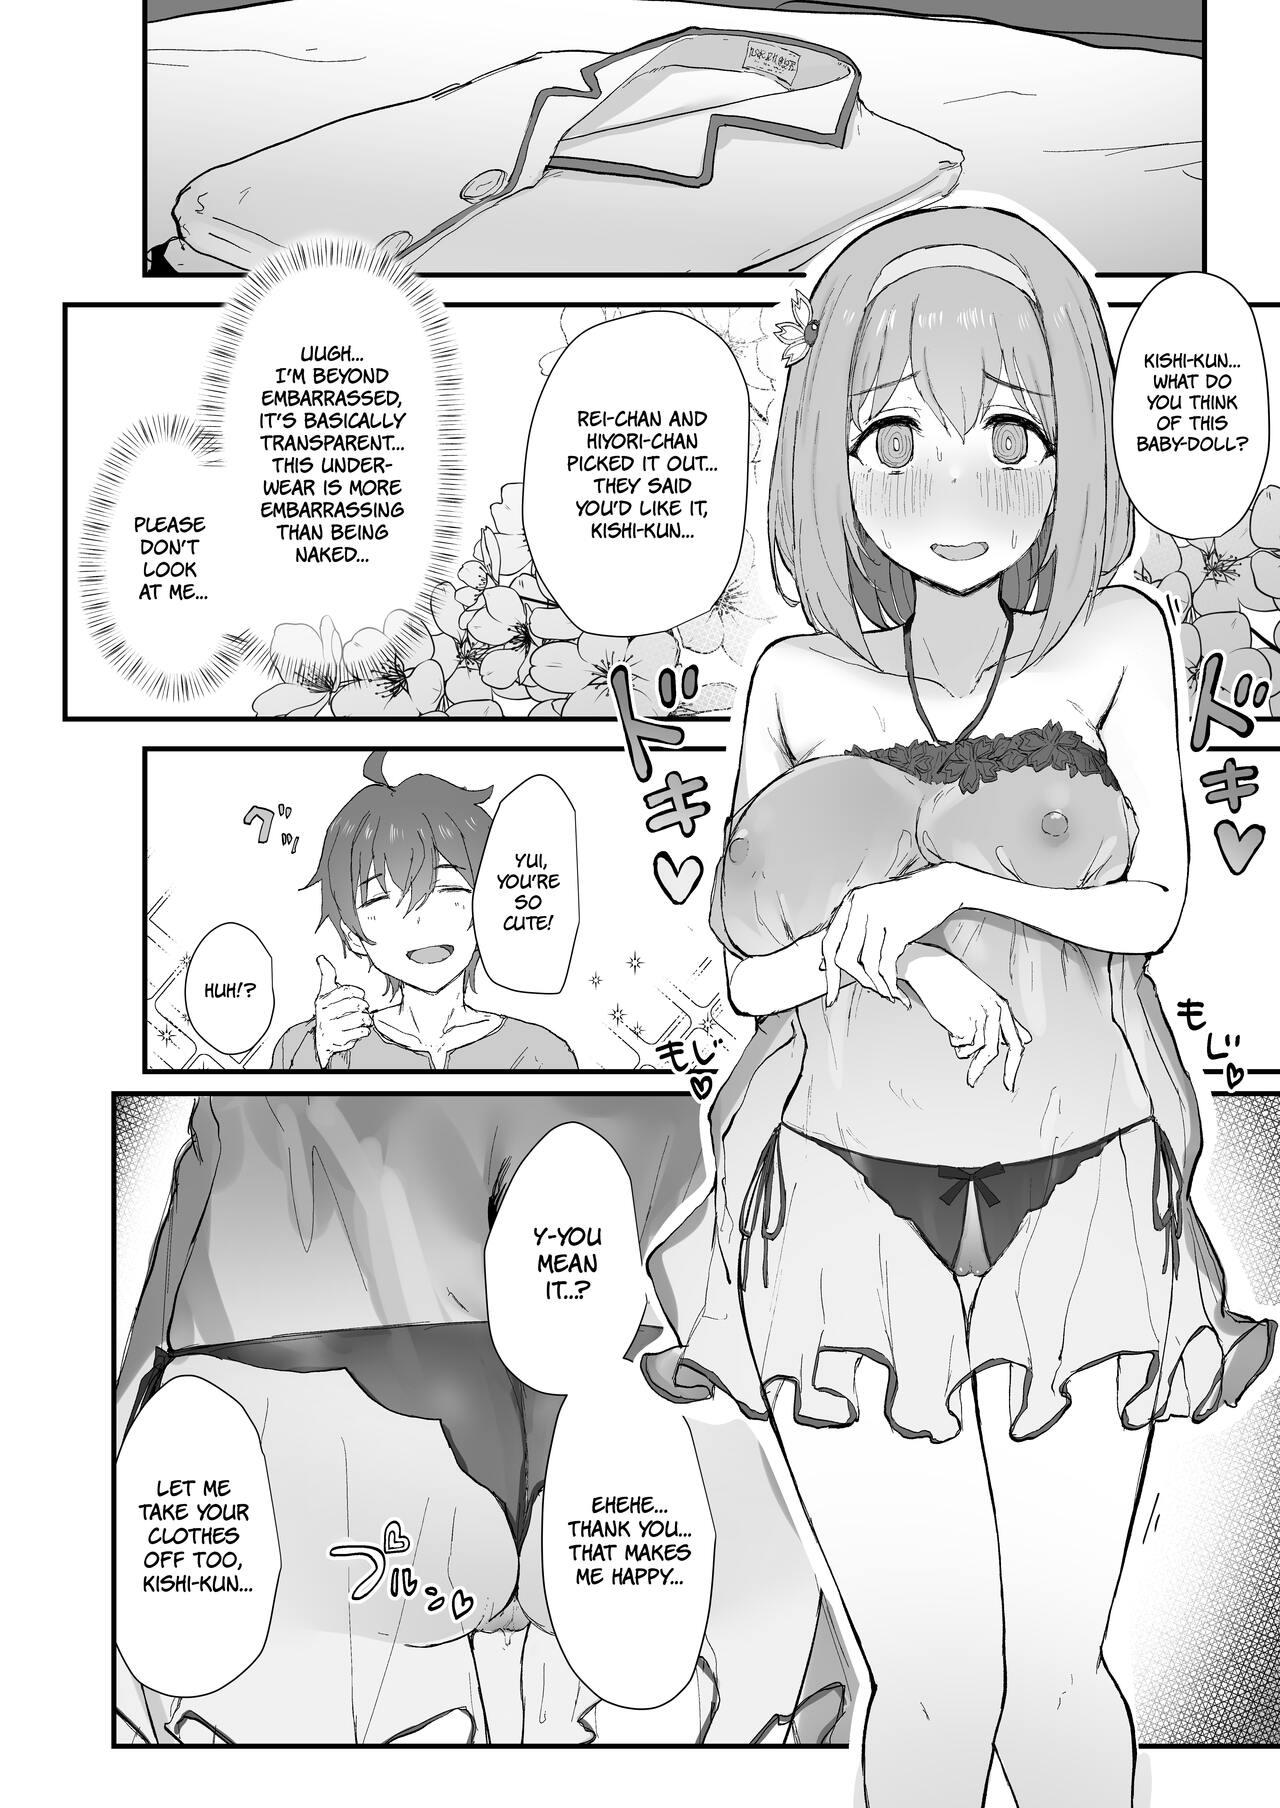 Gloryhole Yui to Icha Love Ecchi Suru hon | A Book About Making Sweet Love with Yui - Princess connect Star - Page 4